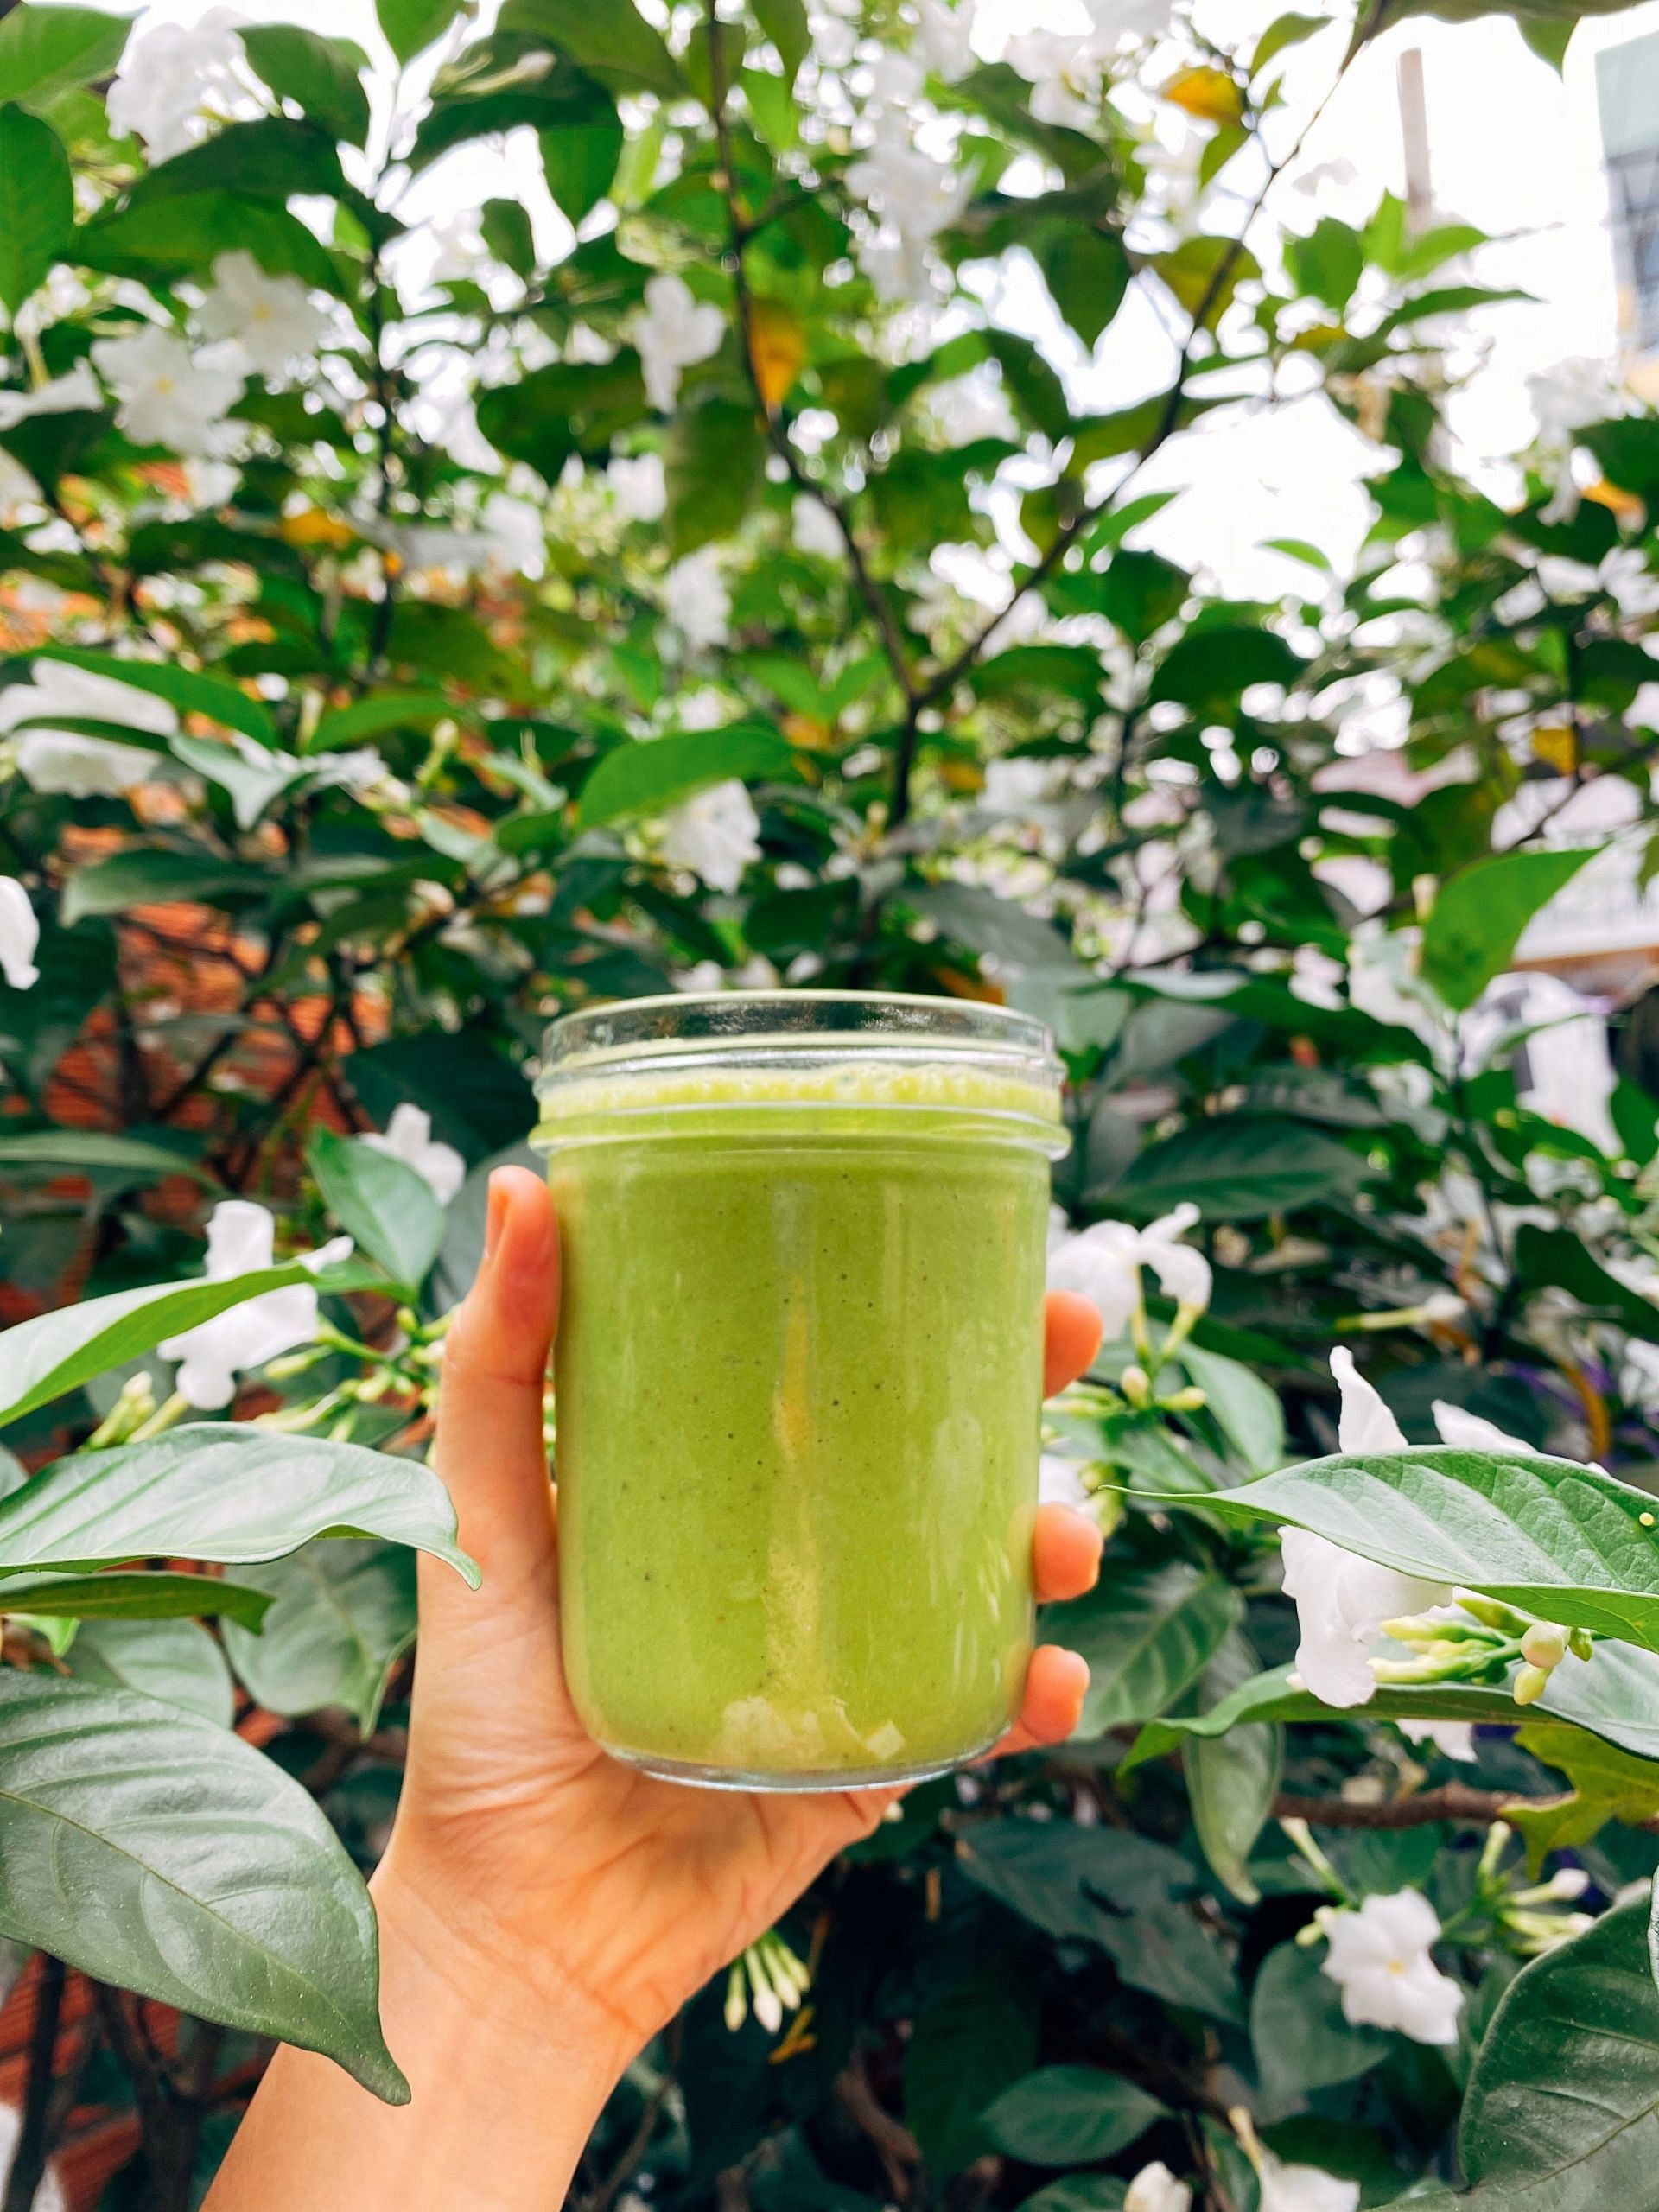 This juice is a fantastic way to increase your daily intake of essential vitamins, minerals, and antioxidants (Image via Pexels)